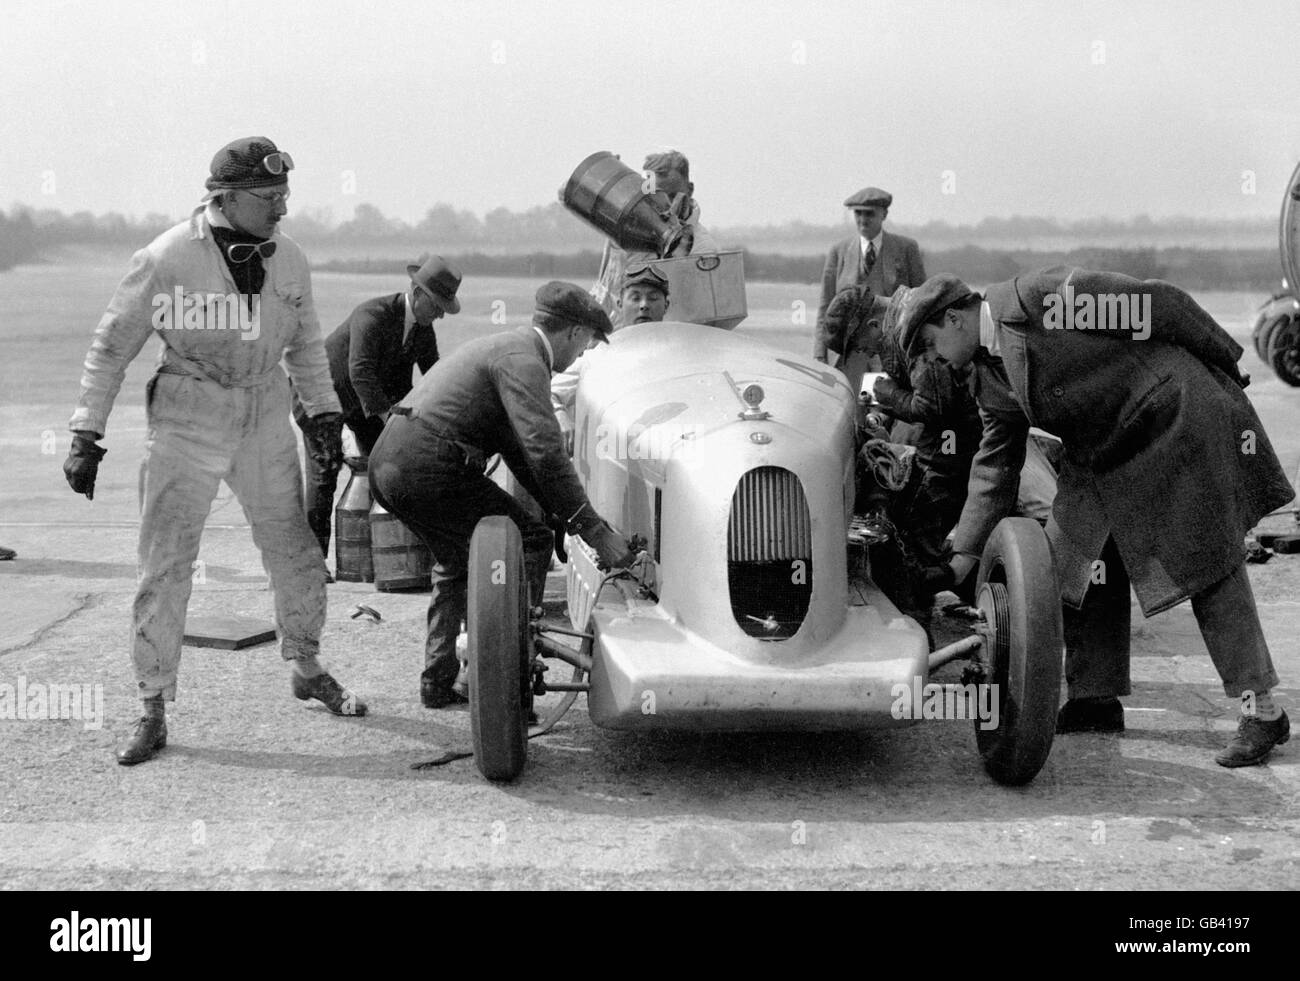 The Alfa Romeo of George Eyston and his co-driver RC Stewart is attended to by mechanics before a record attempt. Stock Photo